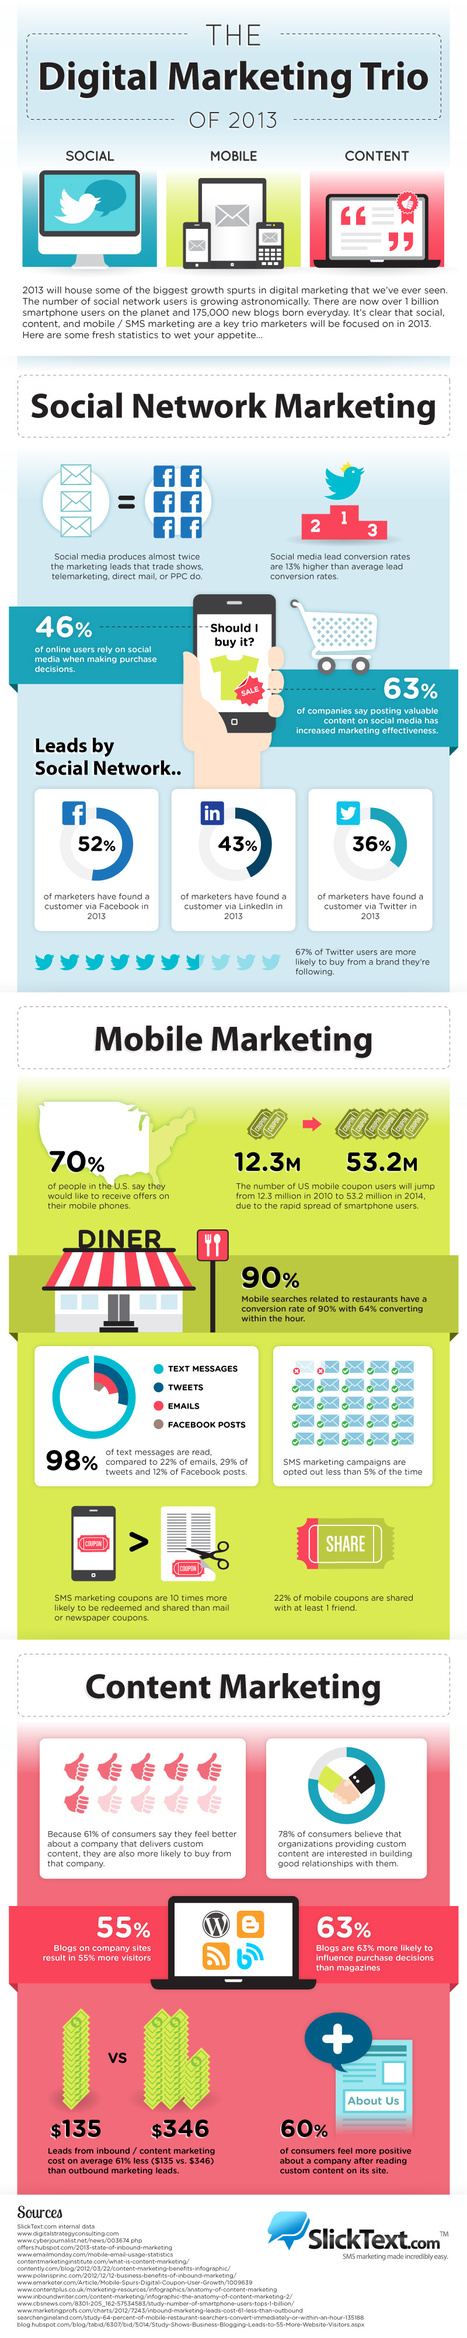 The Digital Marketing Trio Of 2013 [Infographic] | Technology in Business Today | Scoop.it